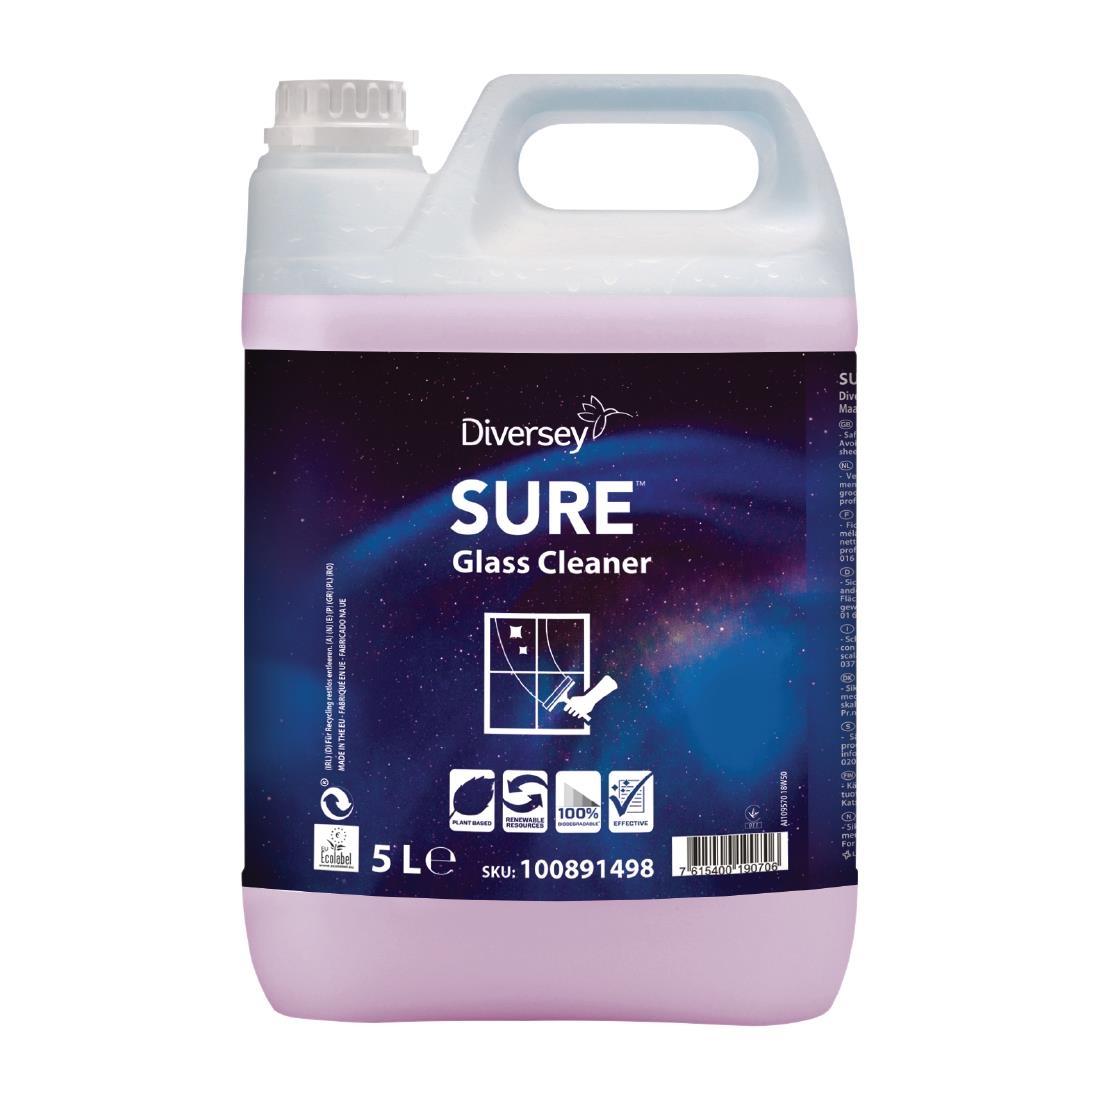 SURE Glass Cleaner Ready To Use 5Ltr (2 Pack) - FA226  - 1